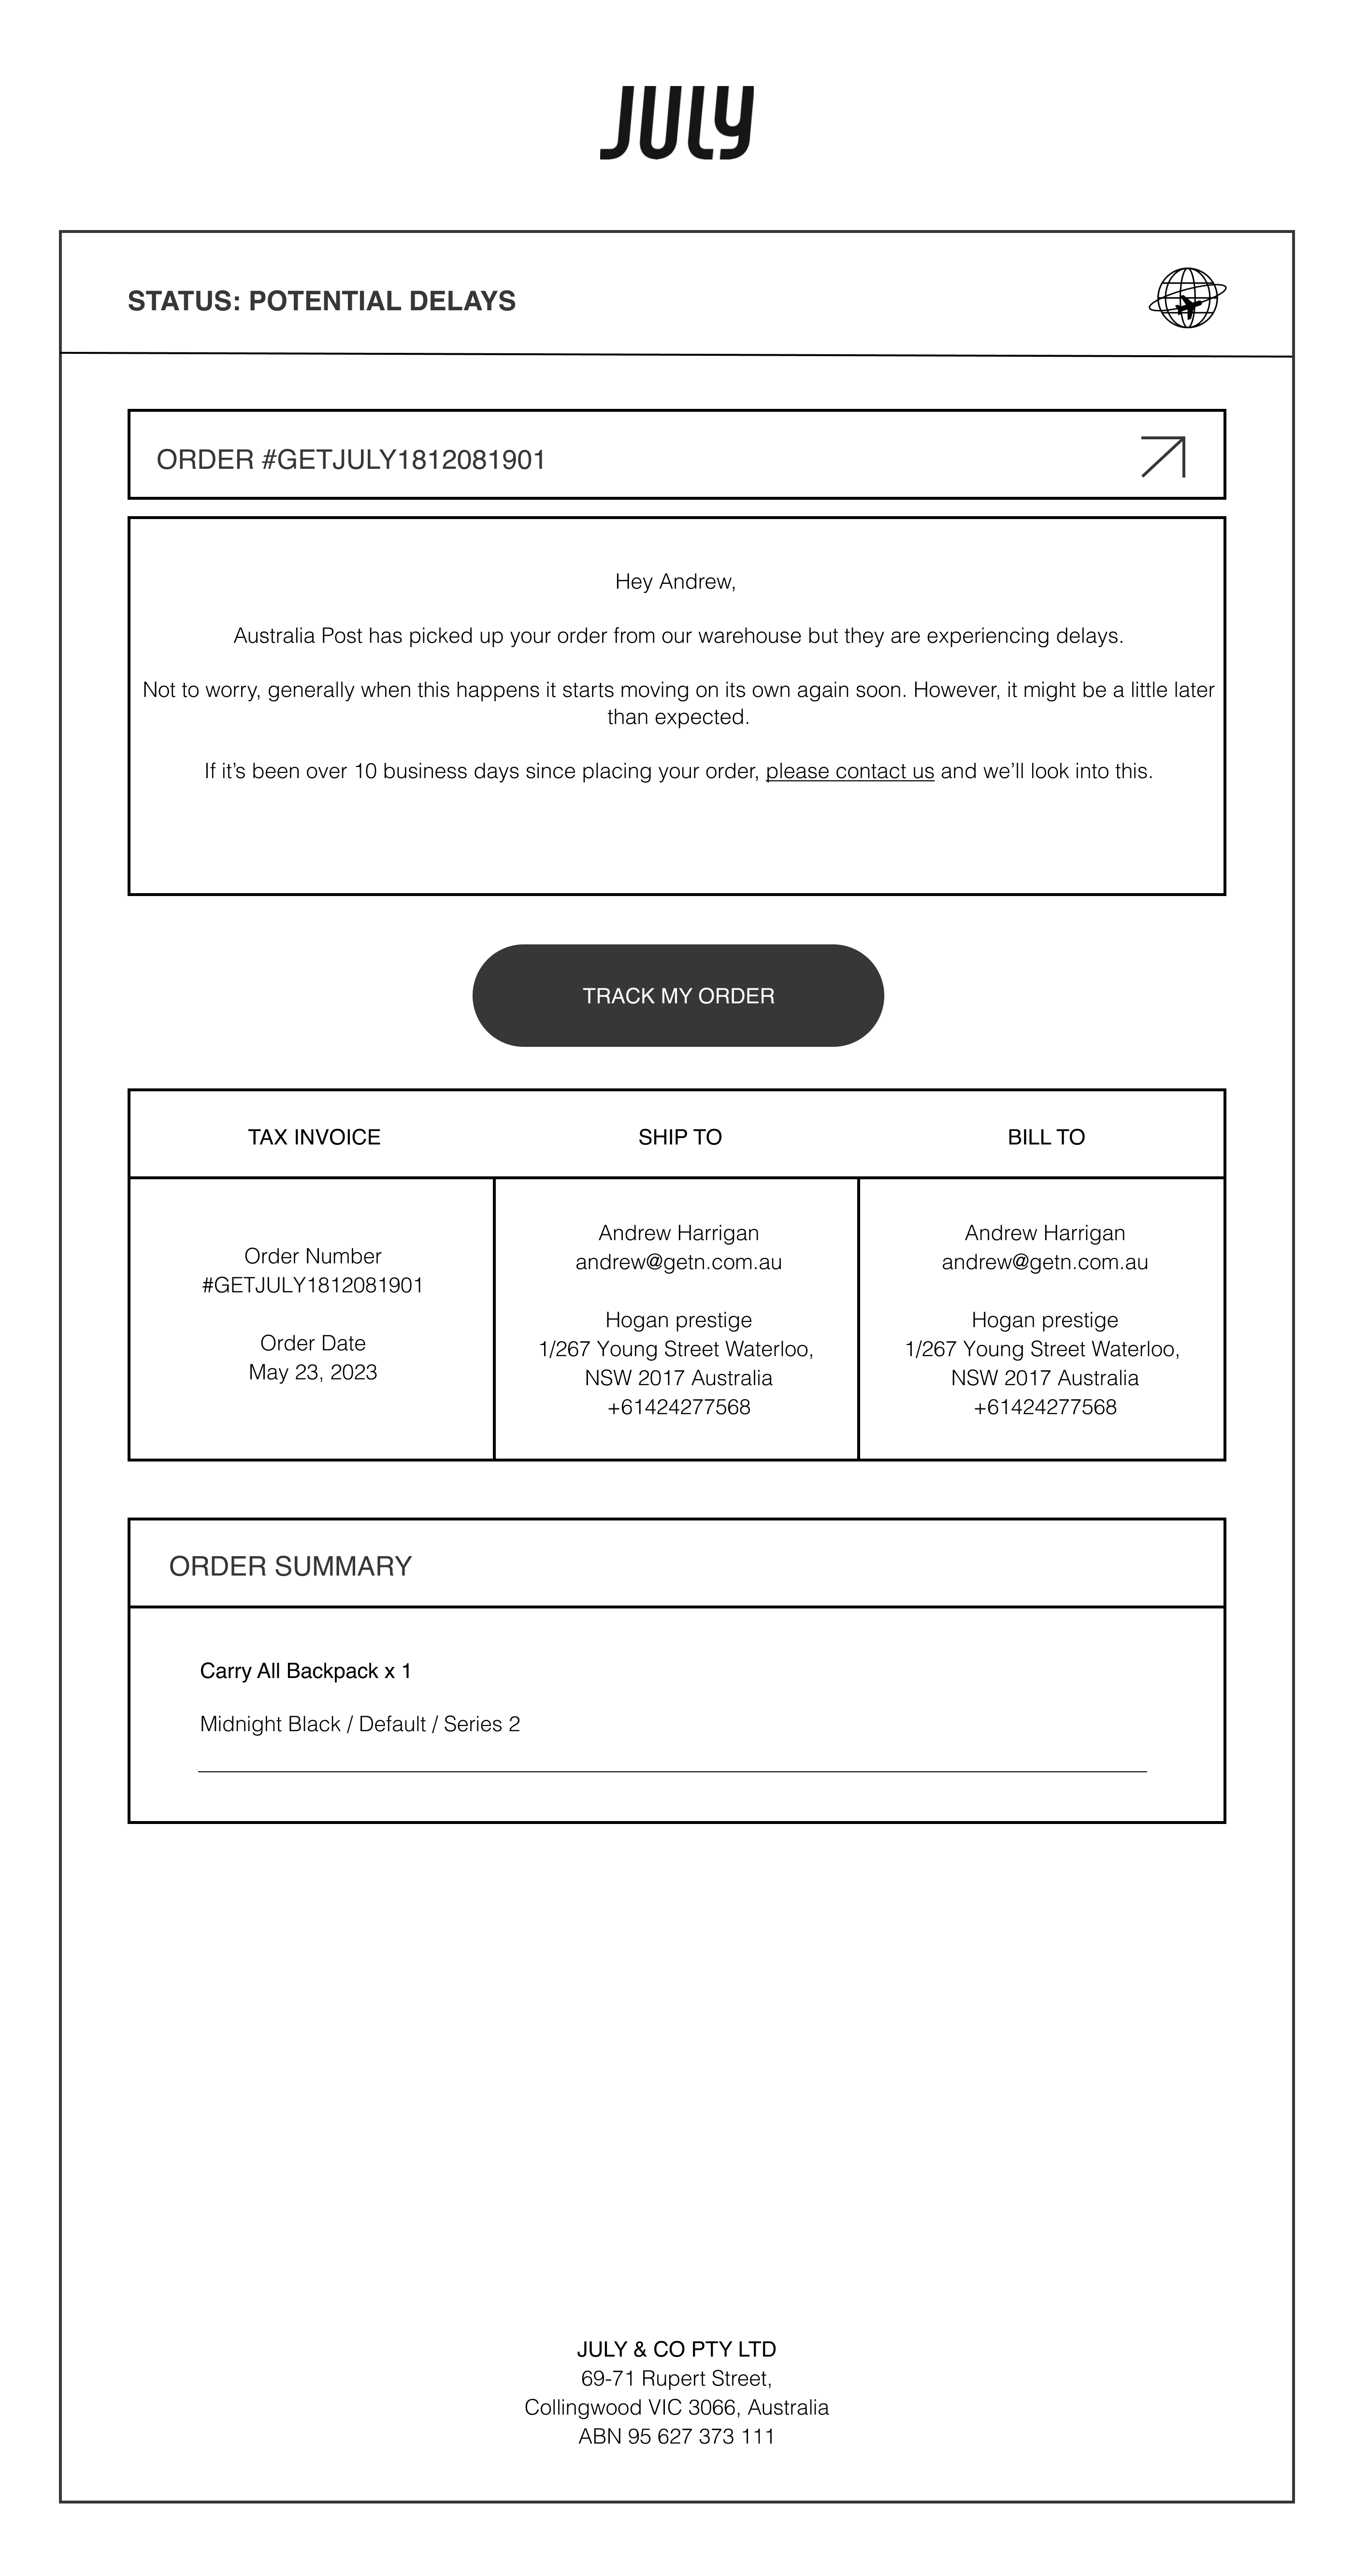 July Delayed Shipment Notification Industry Email Template screenshot